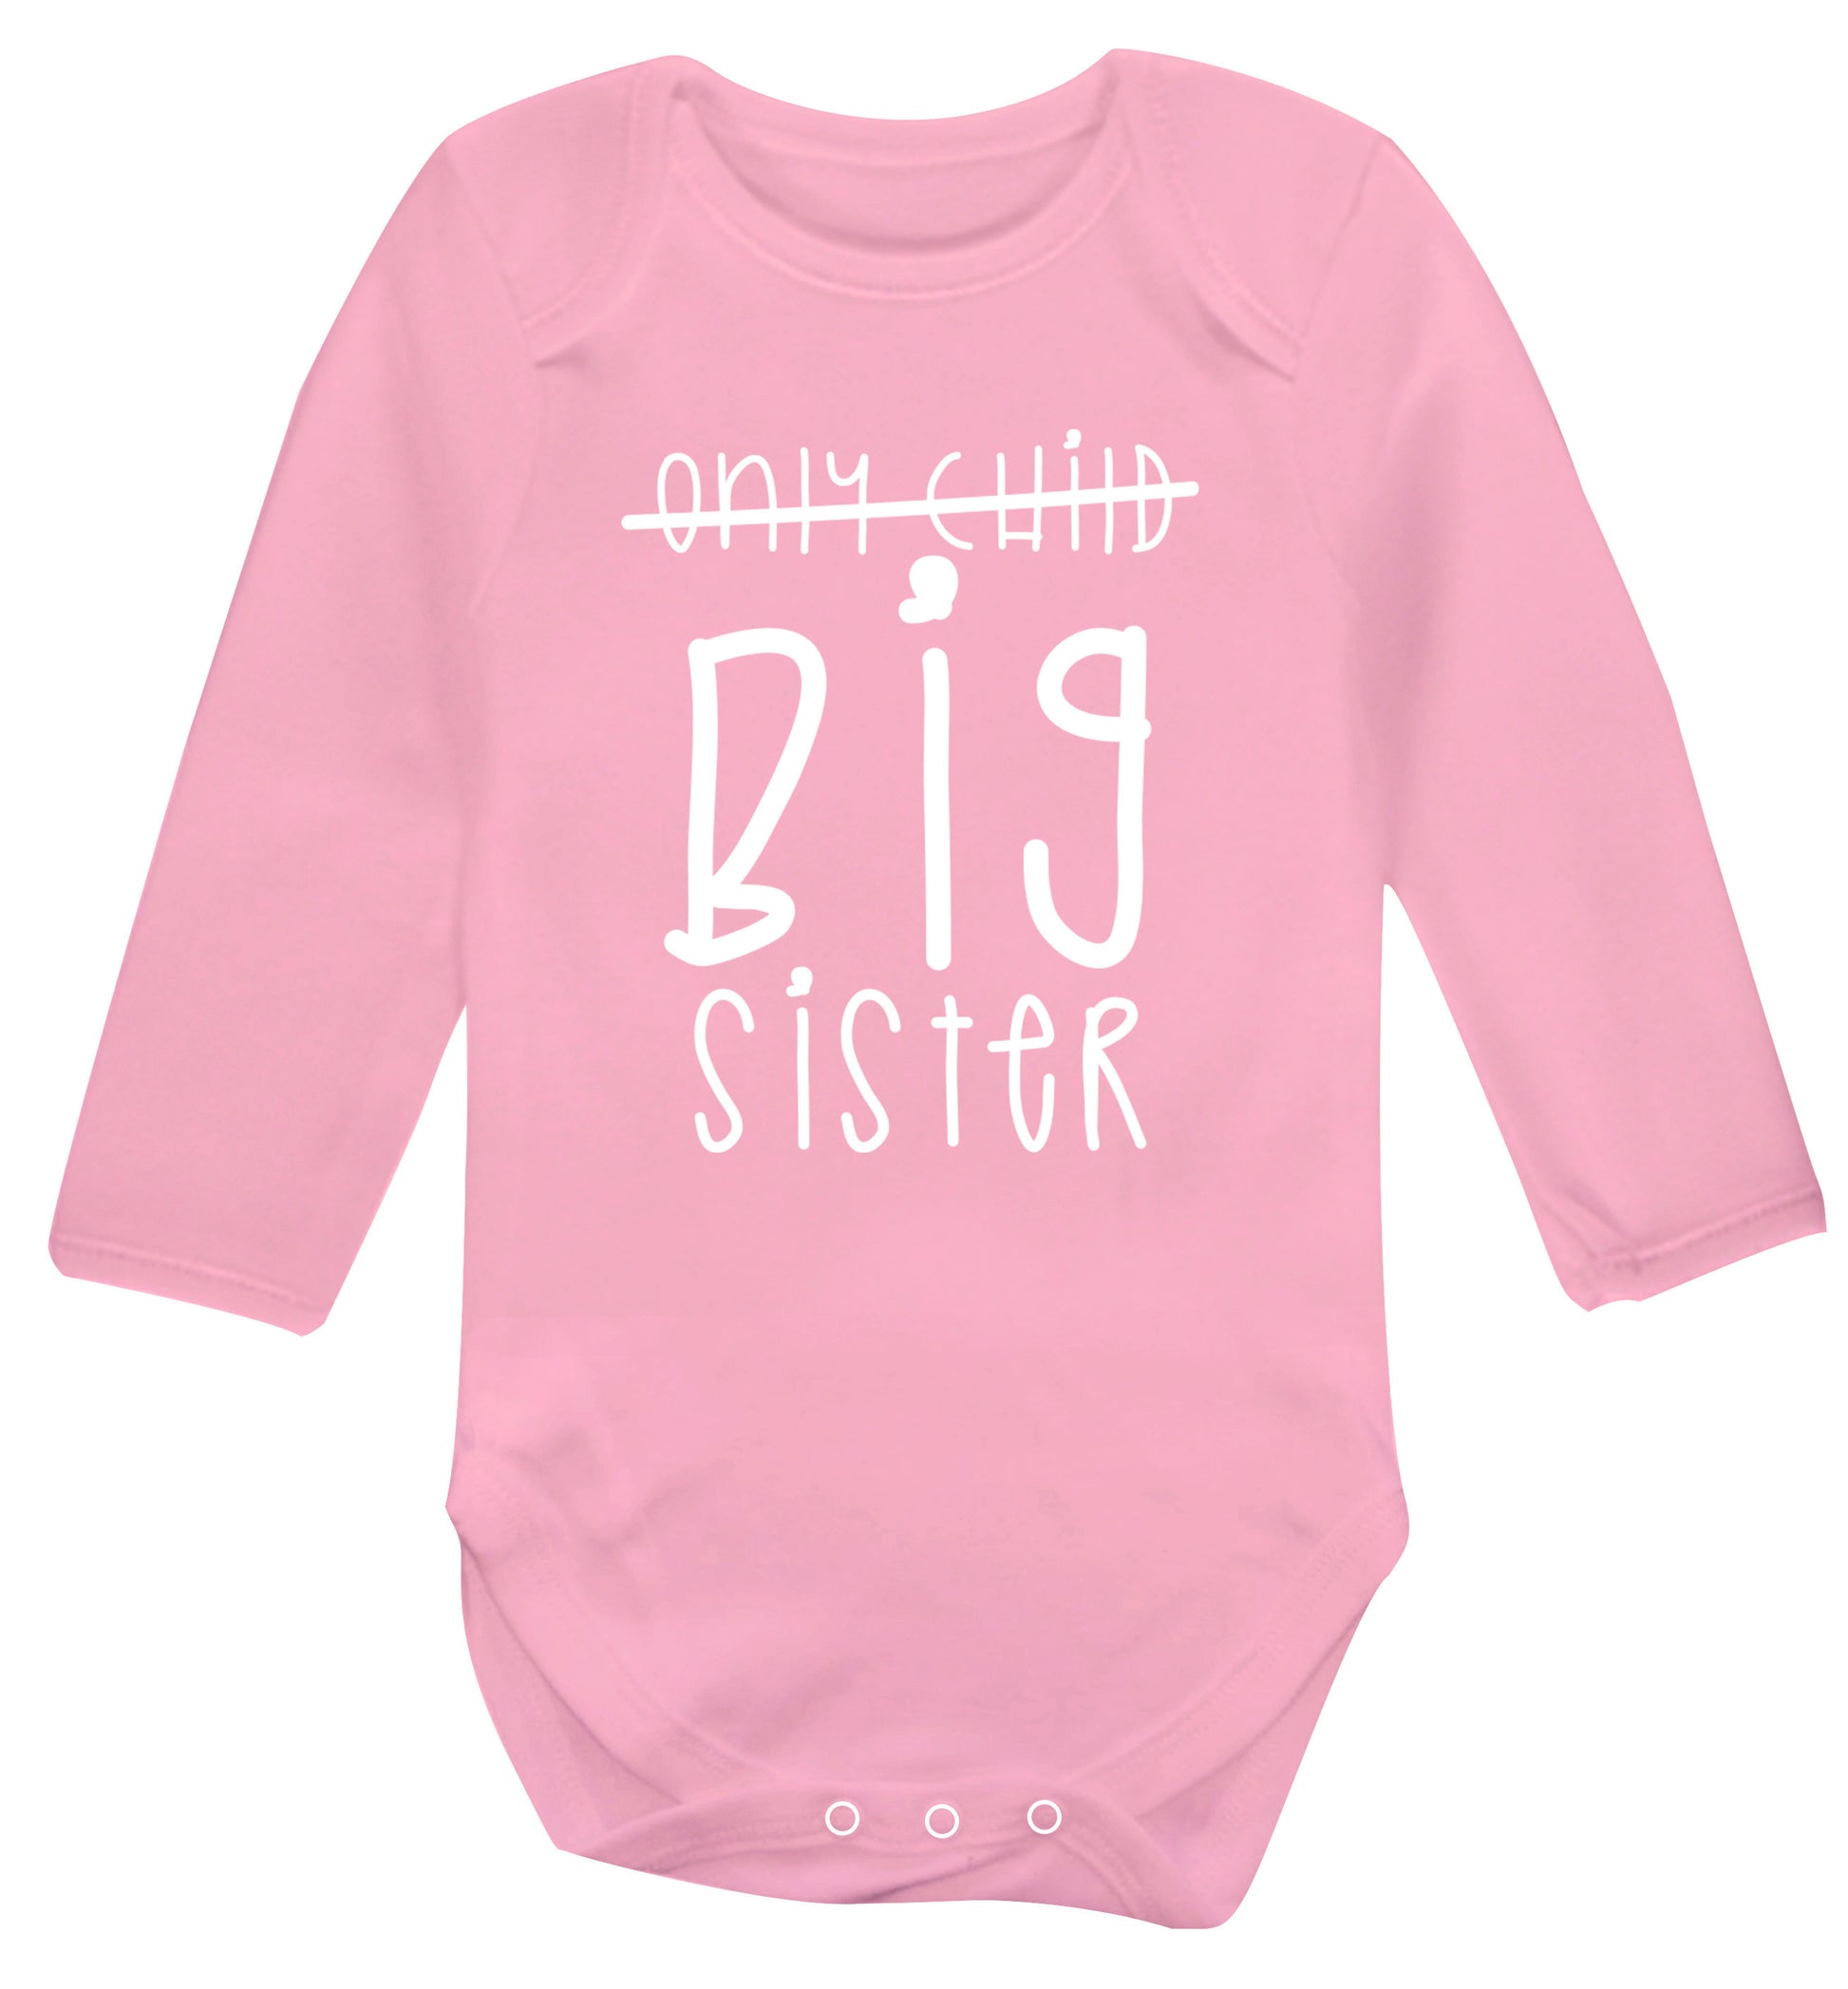 Only child big sister Baby Vest long sleeved pale pink 6-12 months